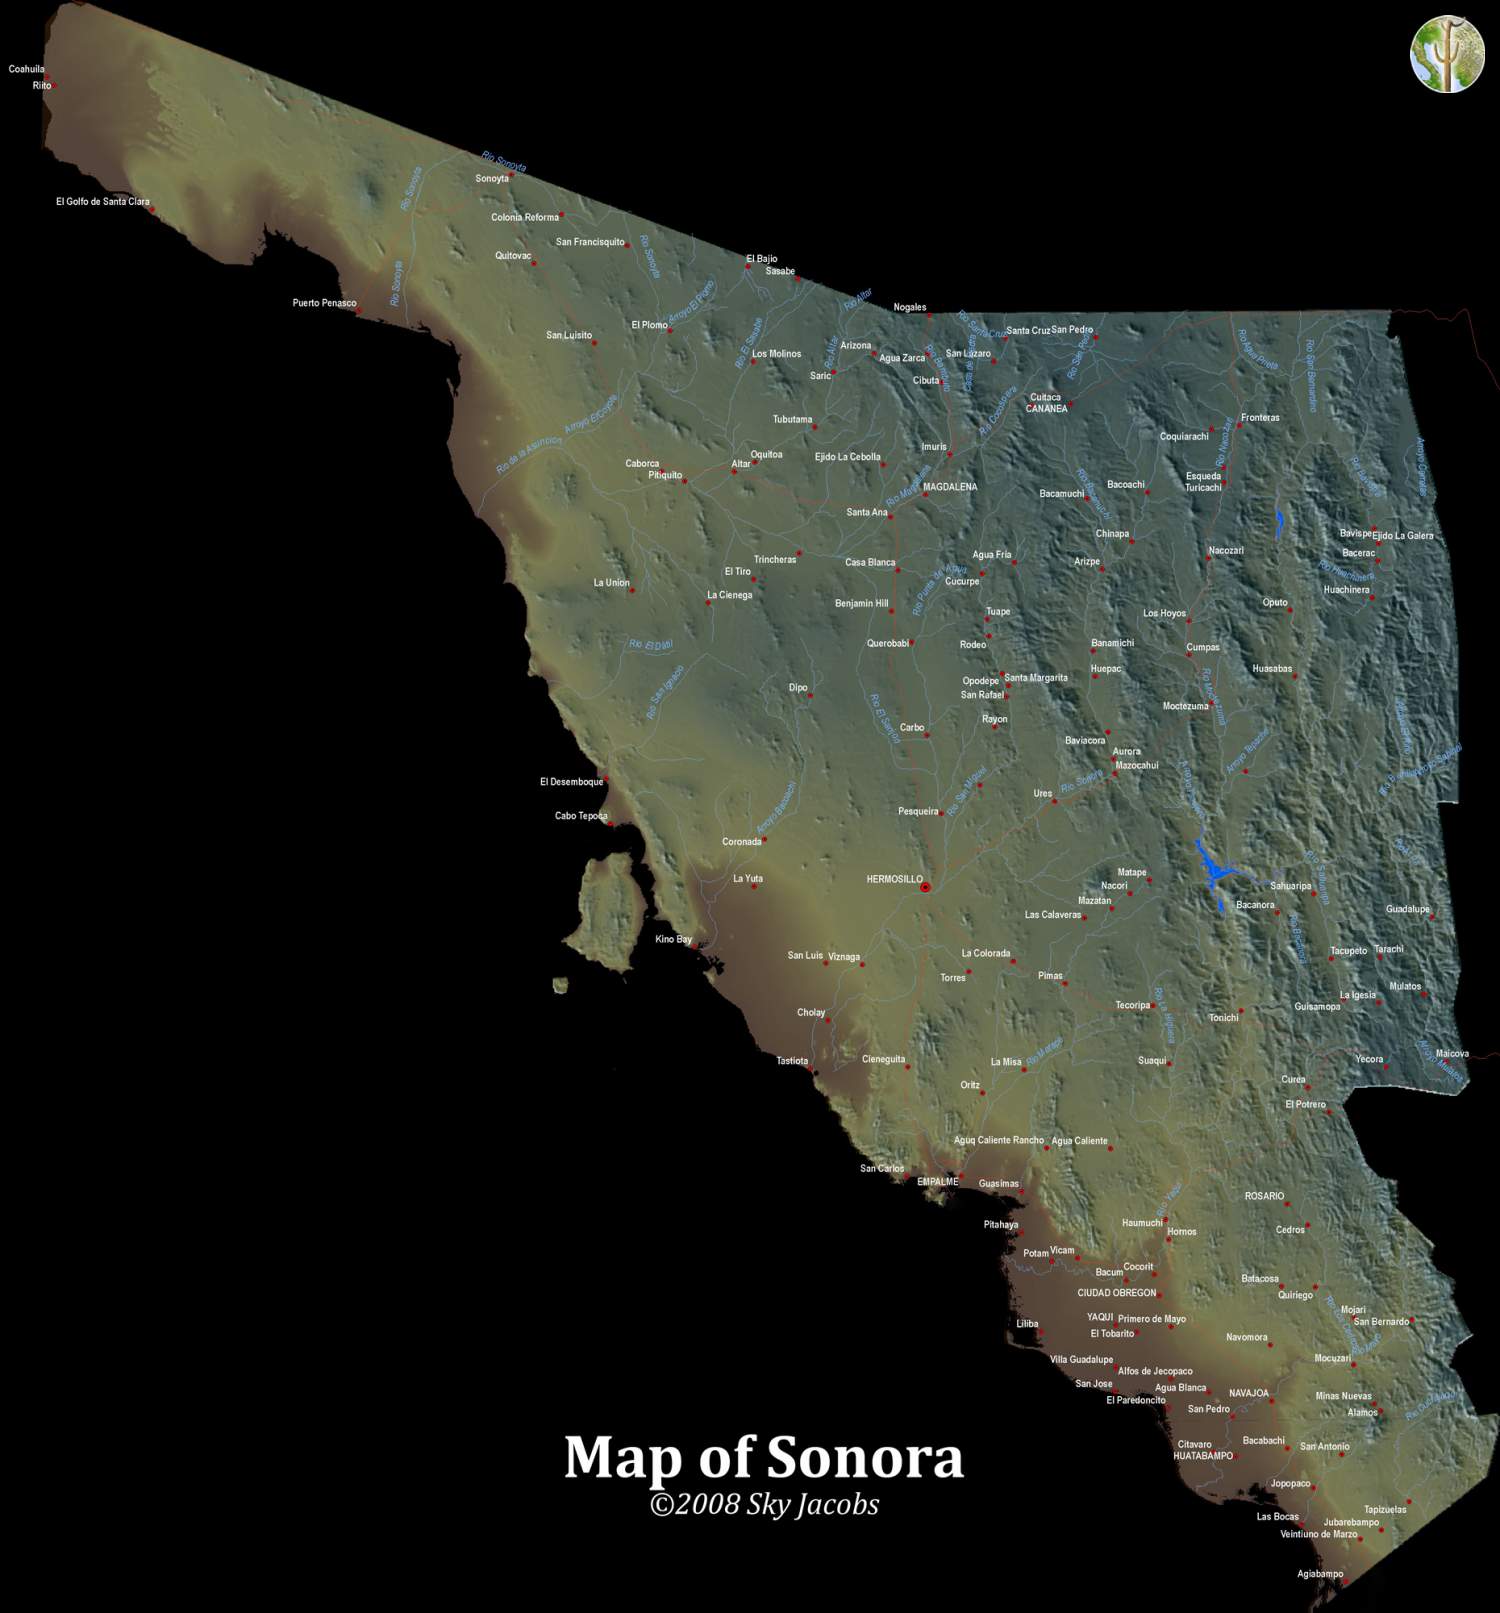 Map of topography, major roads, and rivers of Sonora, Mexico